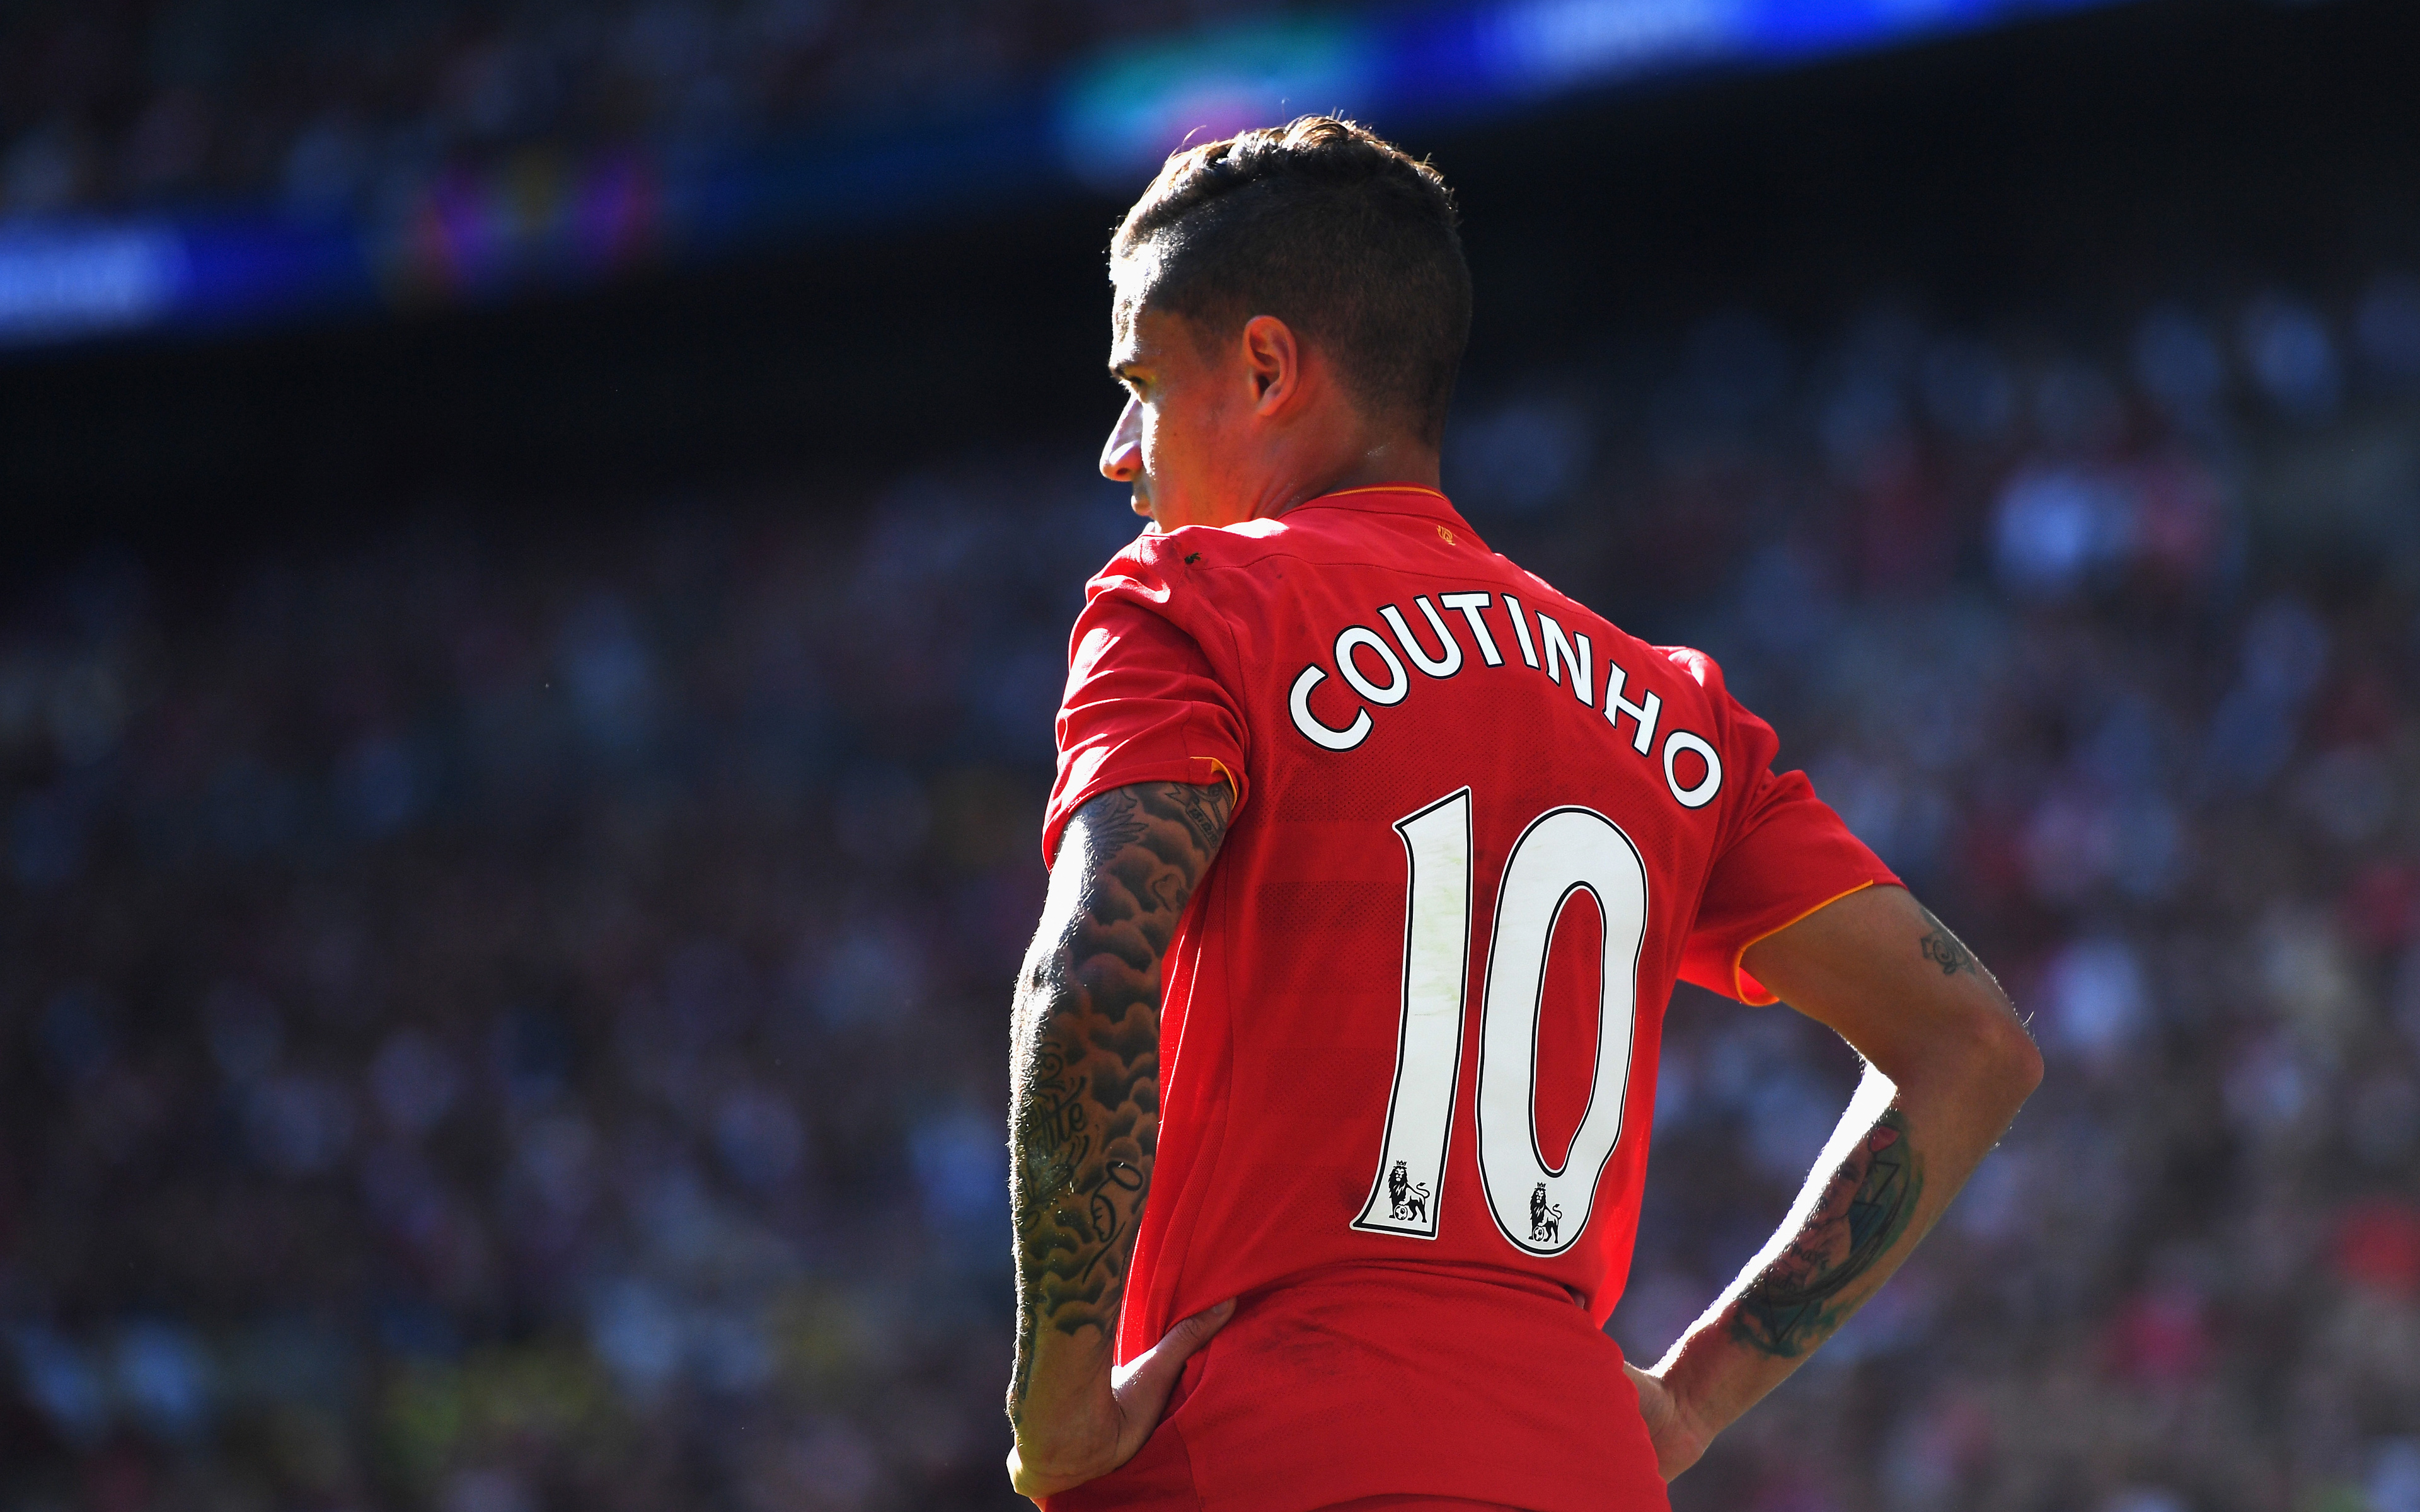 Coutinho Liverpool Wallpapers - Wallpaper Cave